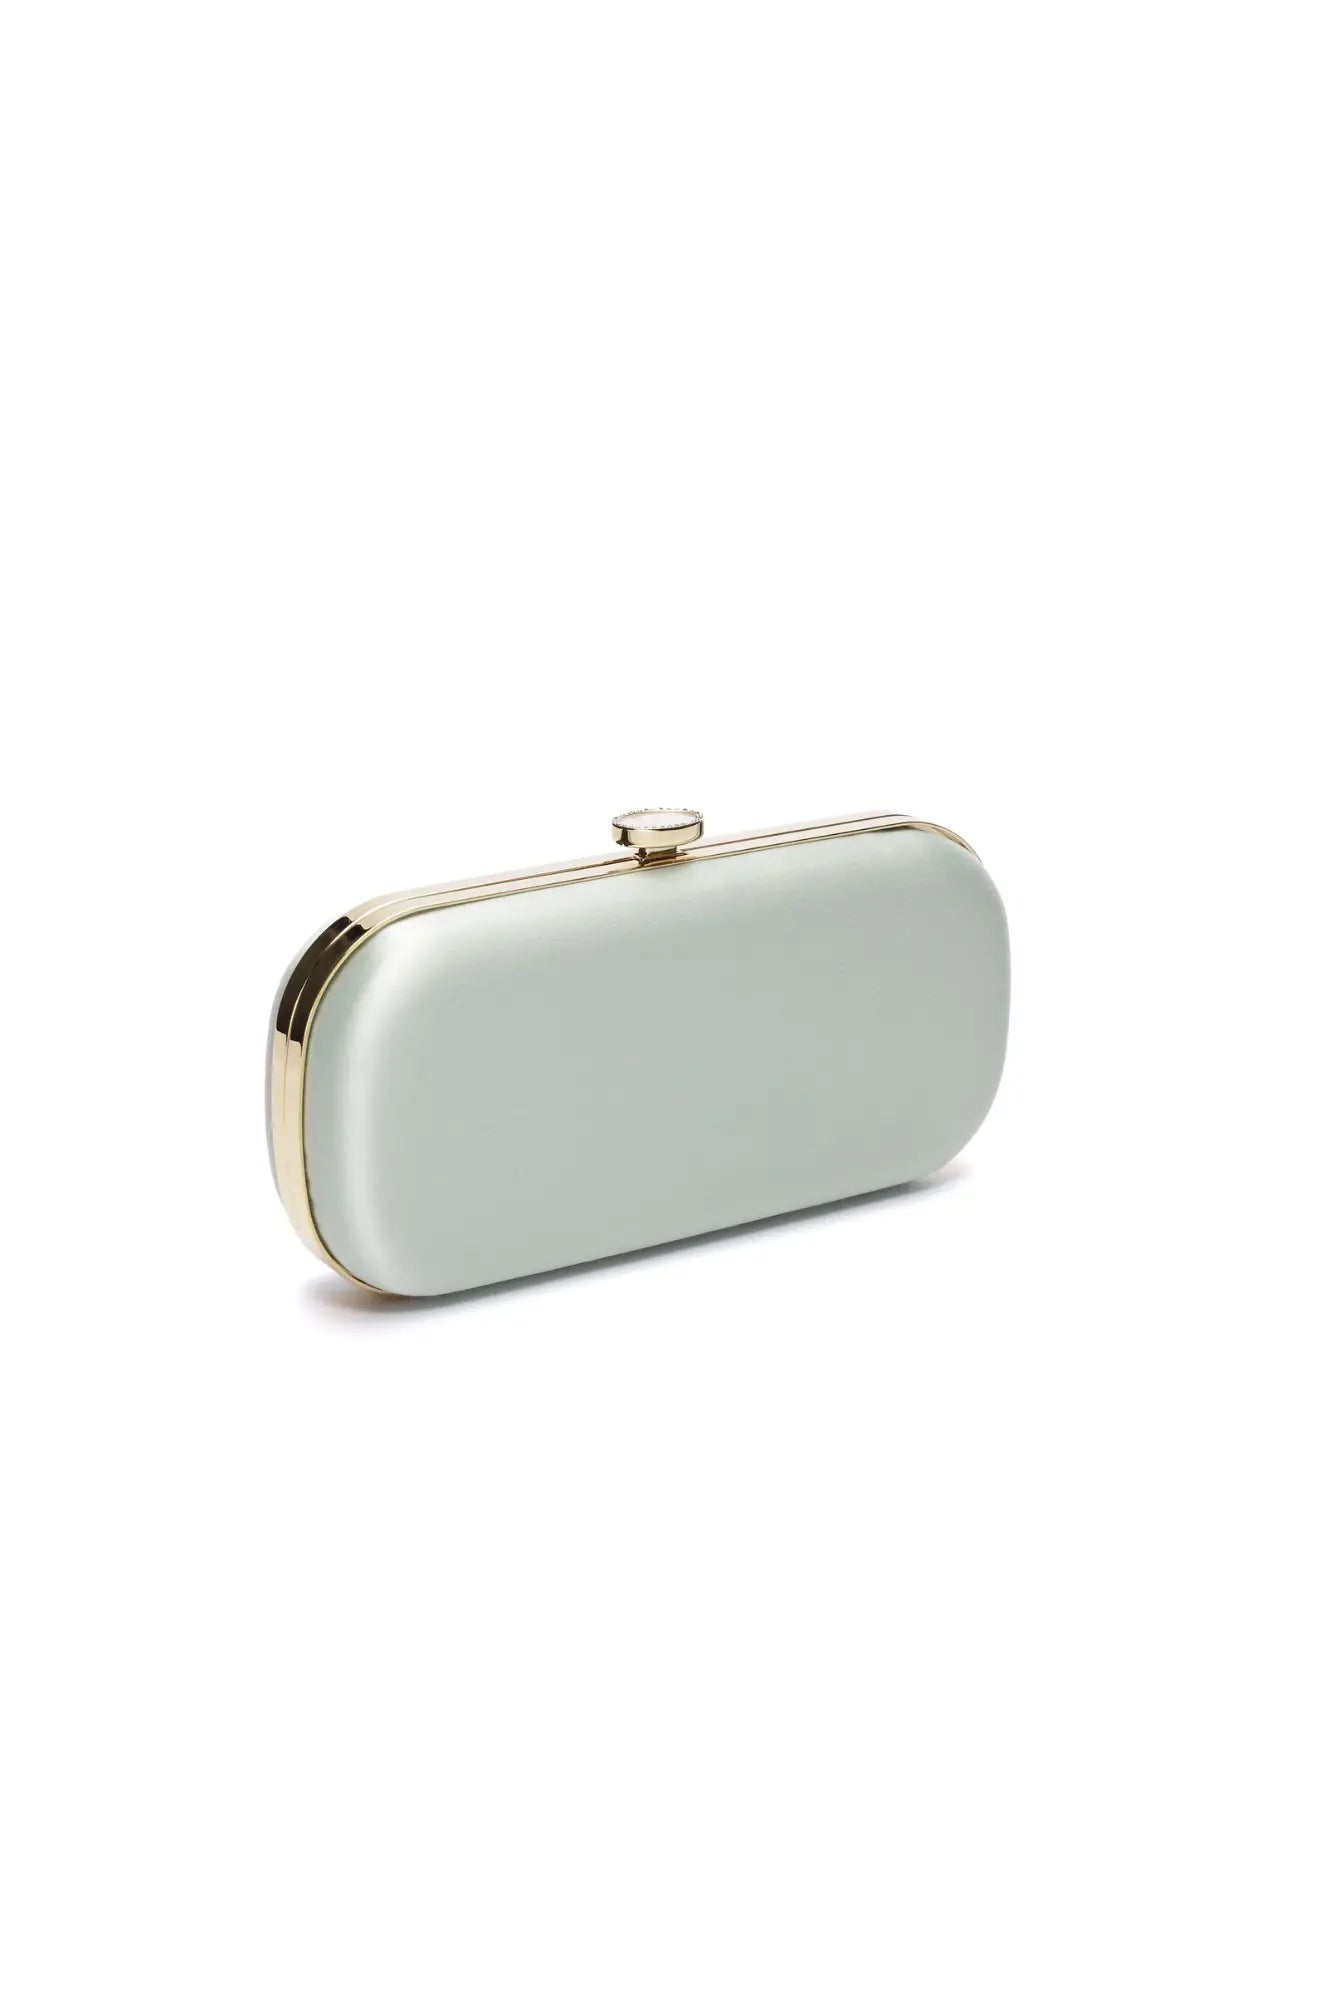 Elegant Sage Green Bella Rosa Collection Clutch with gold accents on a white background, perfect as a wedding handbag.